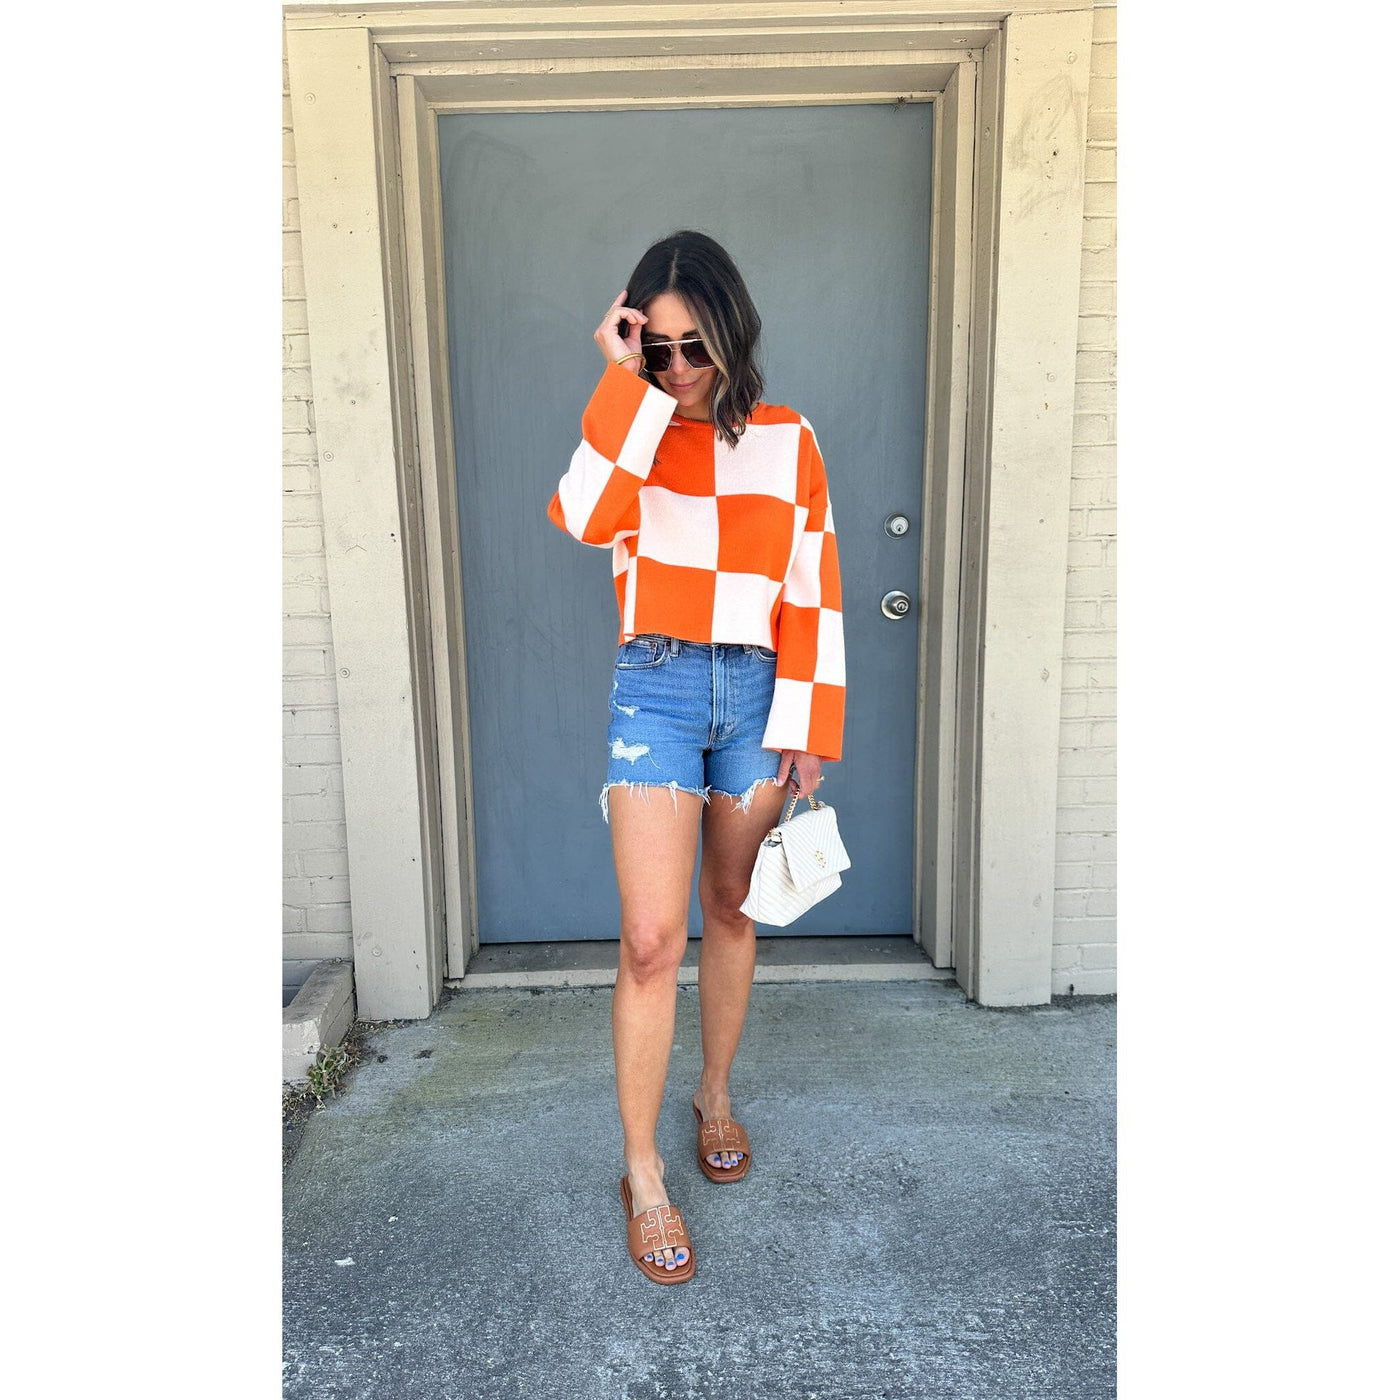 Get In Check Orange And White Checkered Top